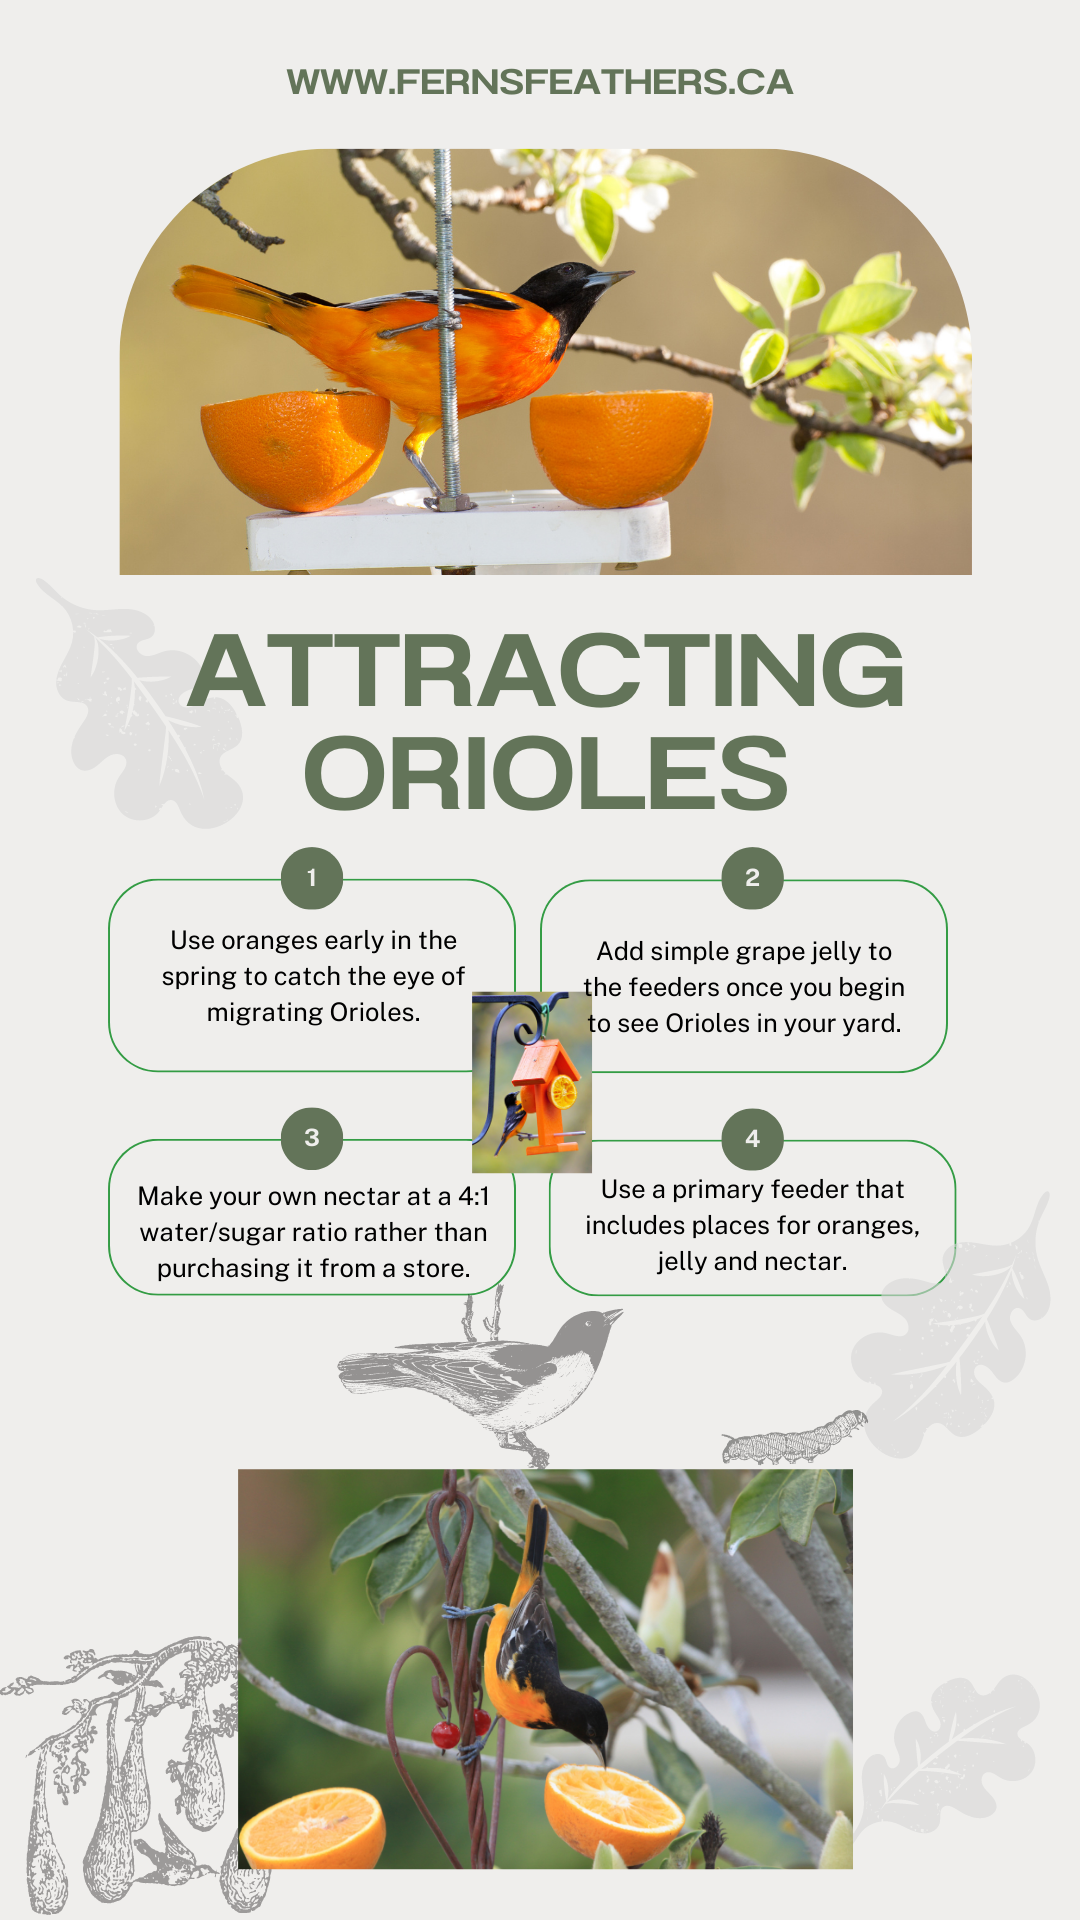 How to attract Orioles to your yard